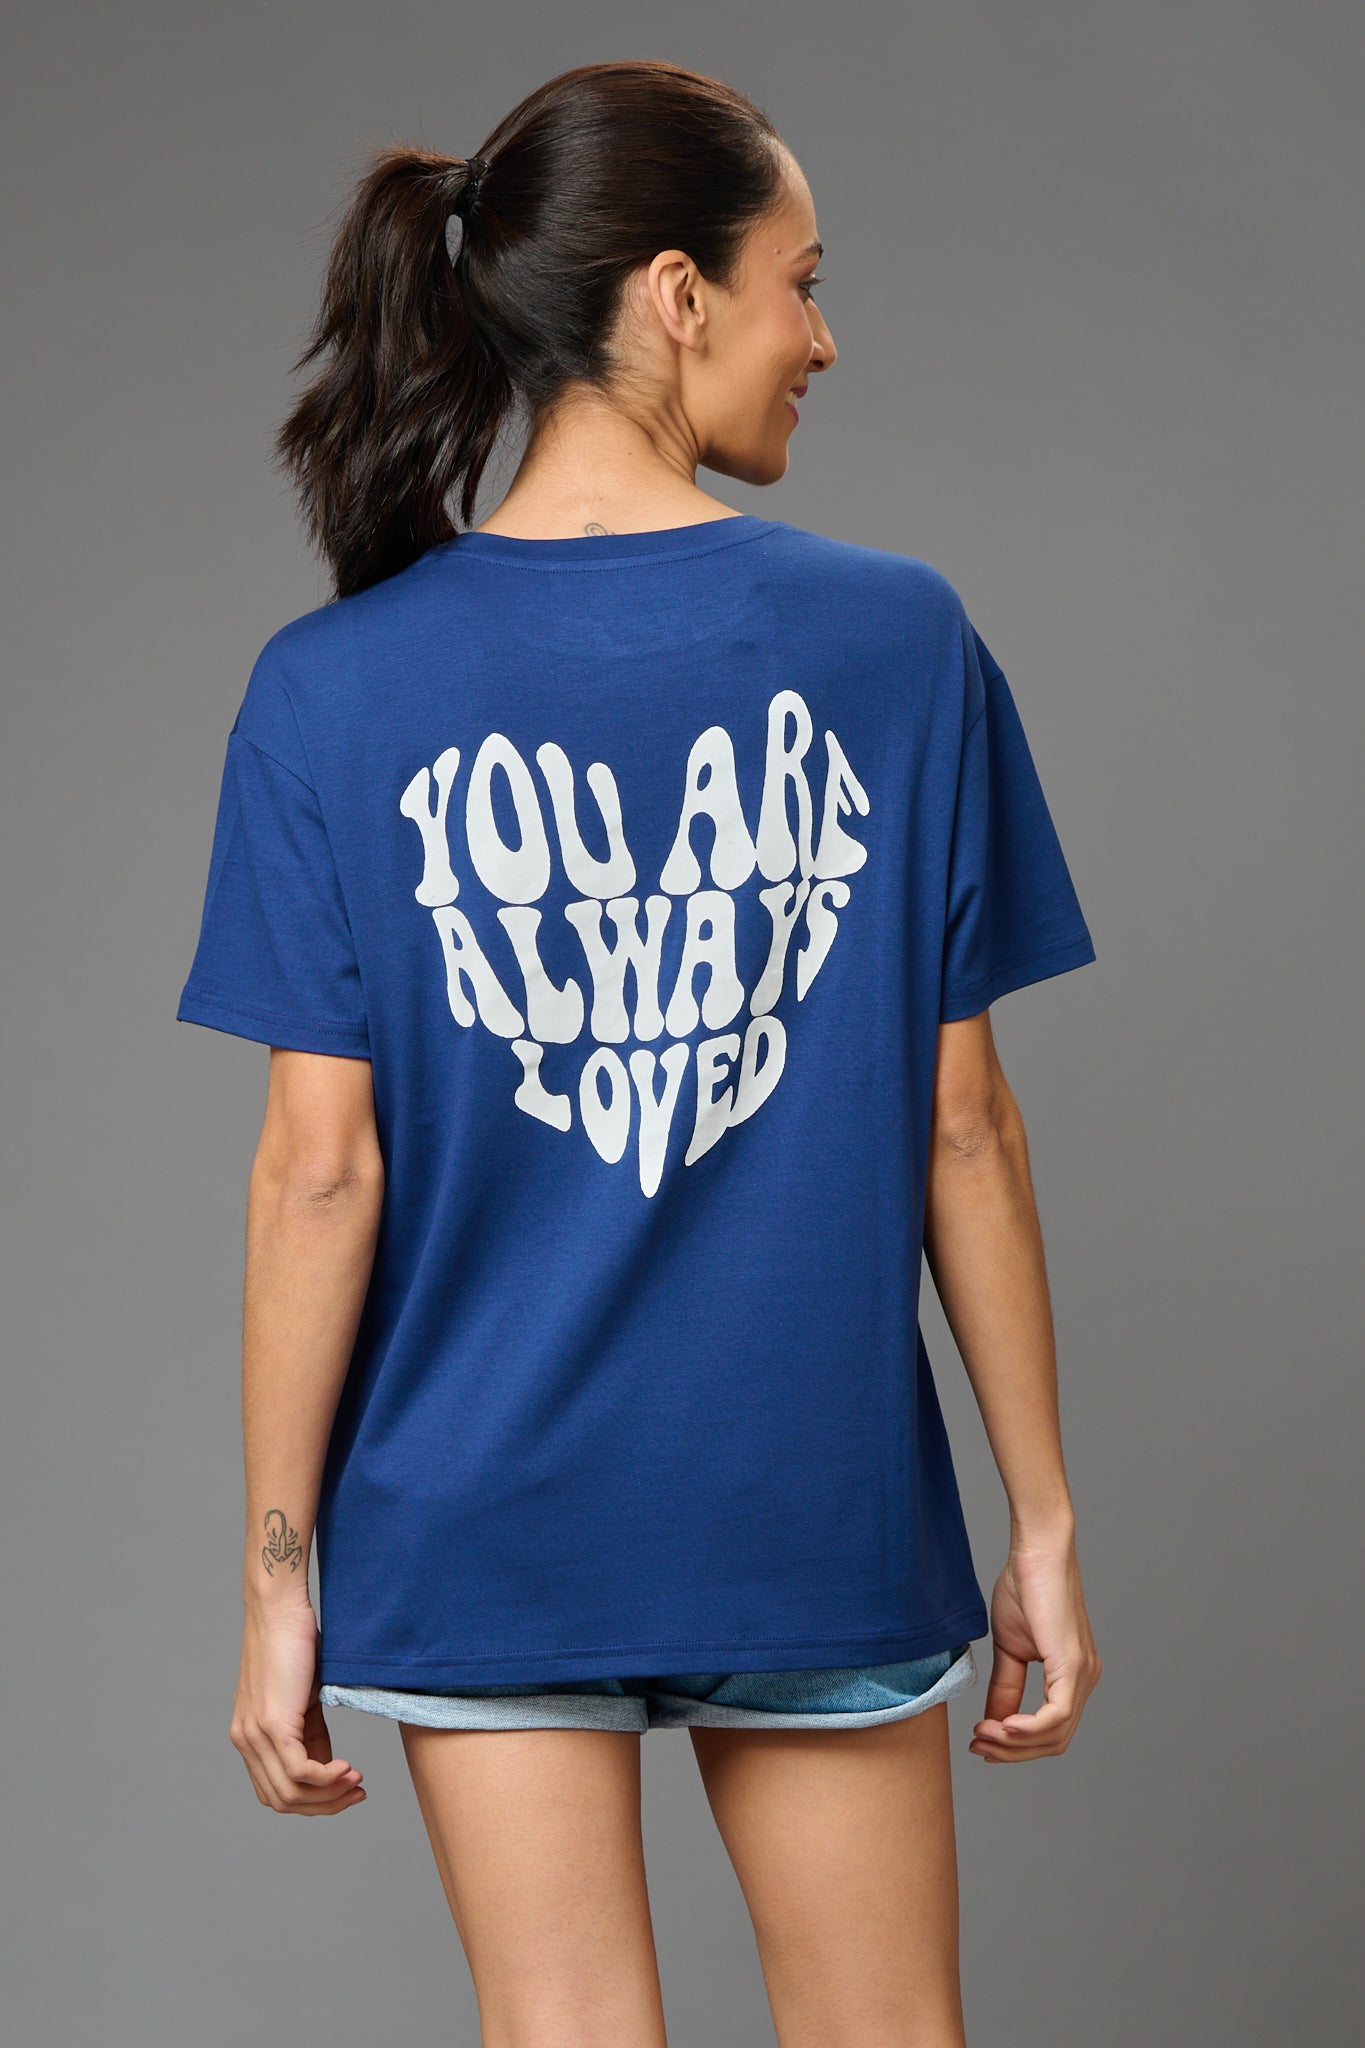 You are Always Loved Printed Blue Oversized T-Shirt for Women - Go Devil